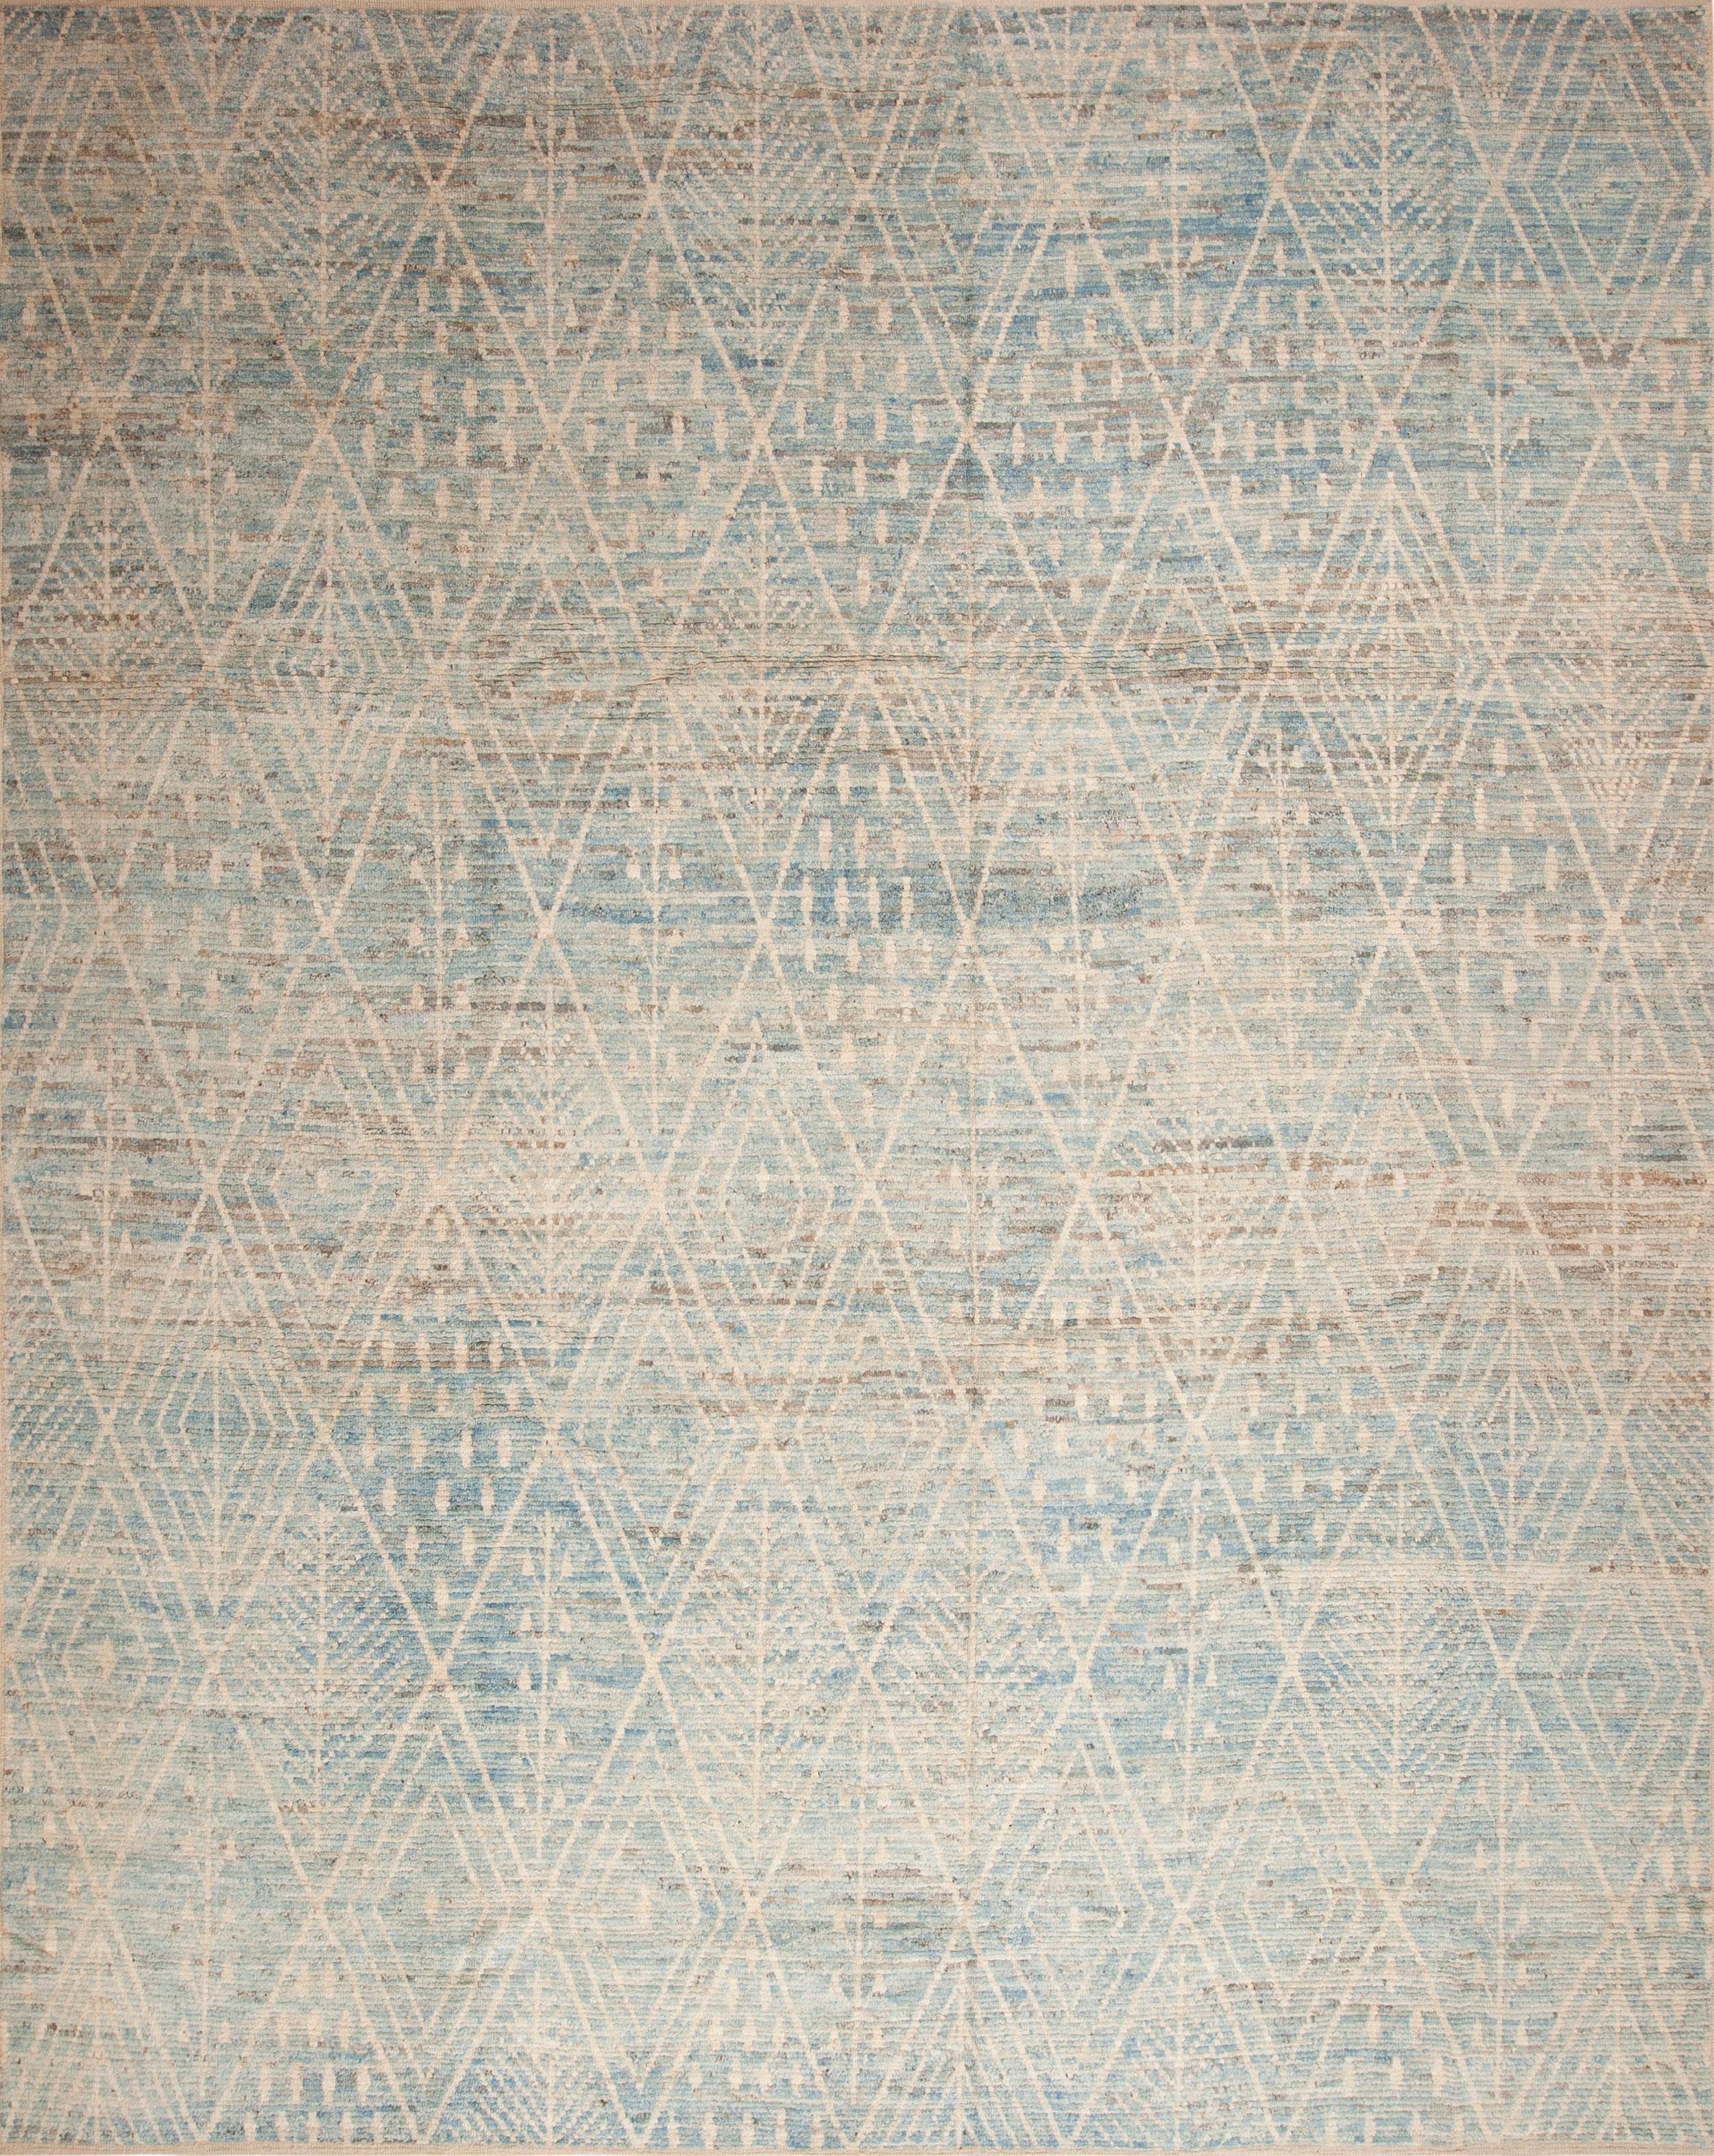 Beautifully Decorative Large Size Soft Light Blue Color Tribal Geometric Modern Moroccan Beni Ourain Design Rug, Country Of Origin: Central Asia, Circa Date: Modern Rug